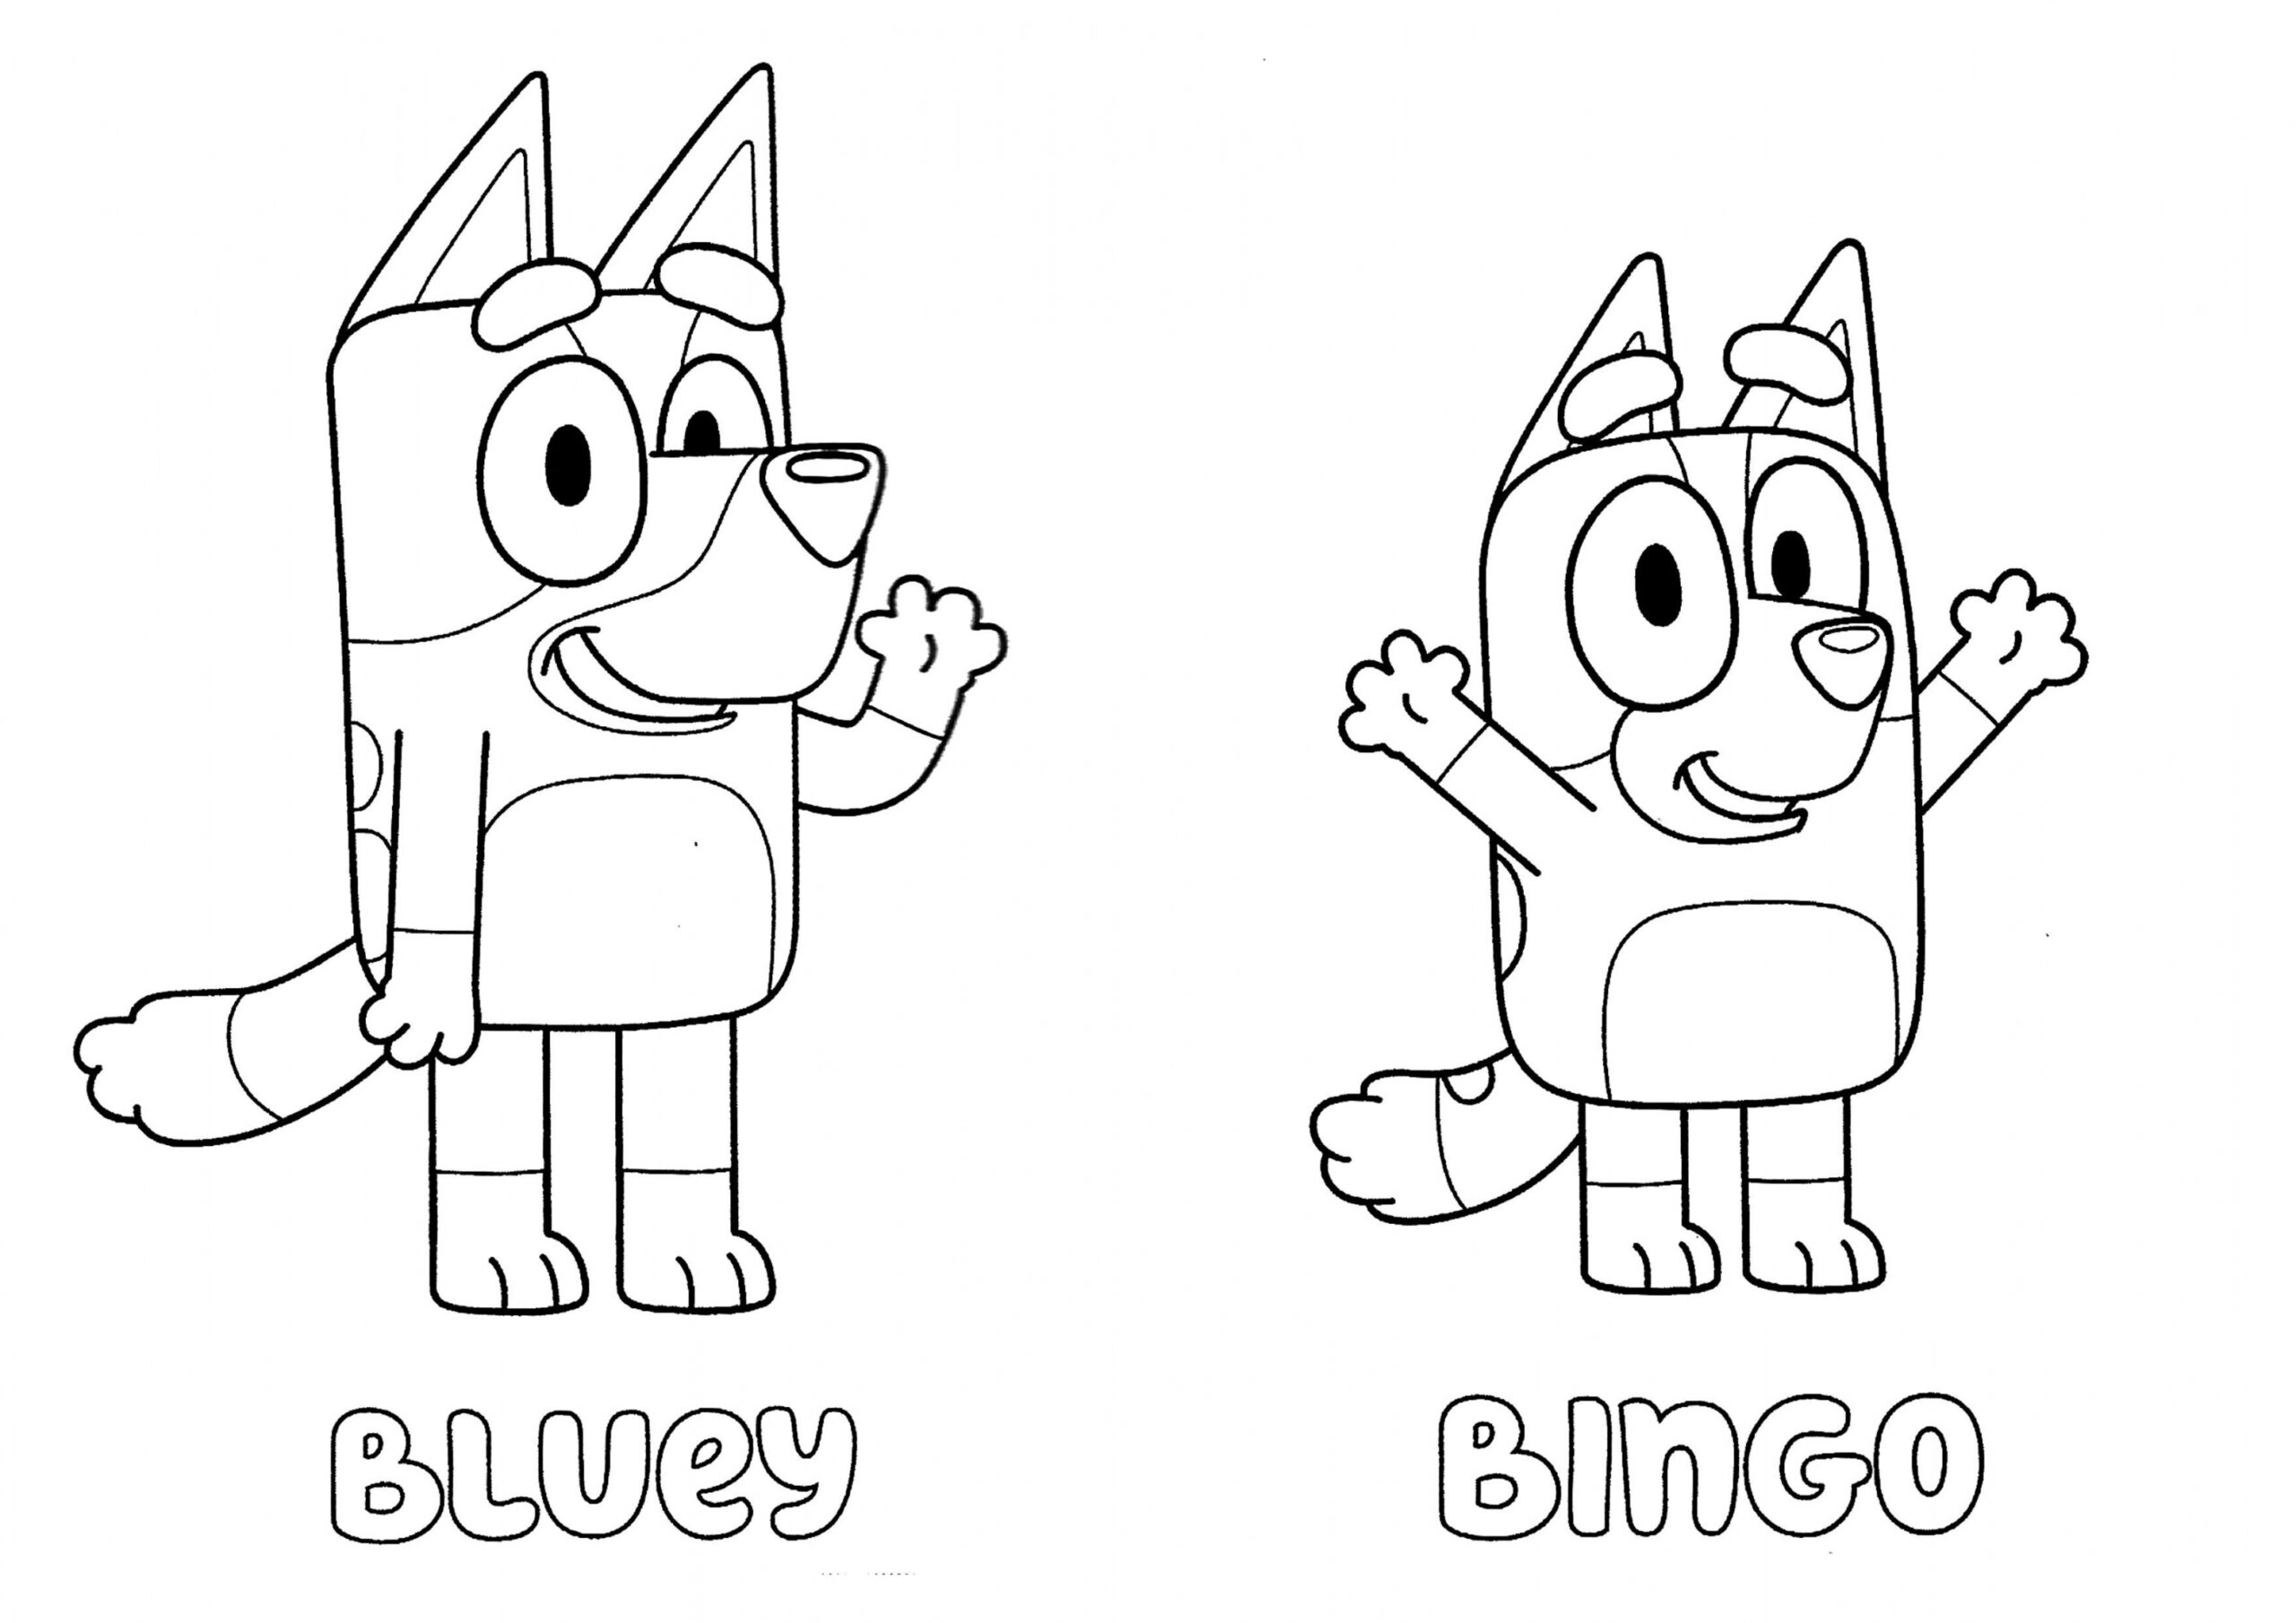 Bluey Coloring Pages Printable Pdf - Coloringfolder - Free Printable Bluey Coloring Pages